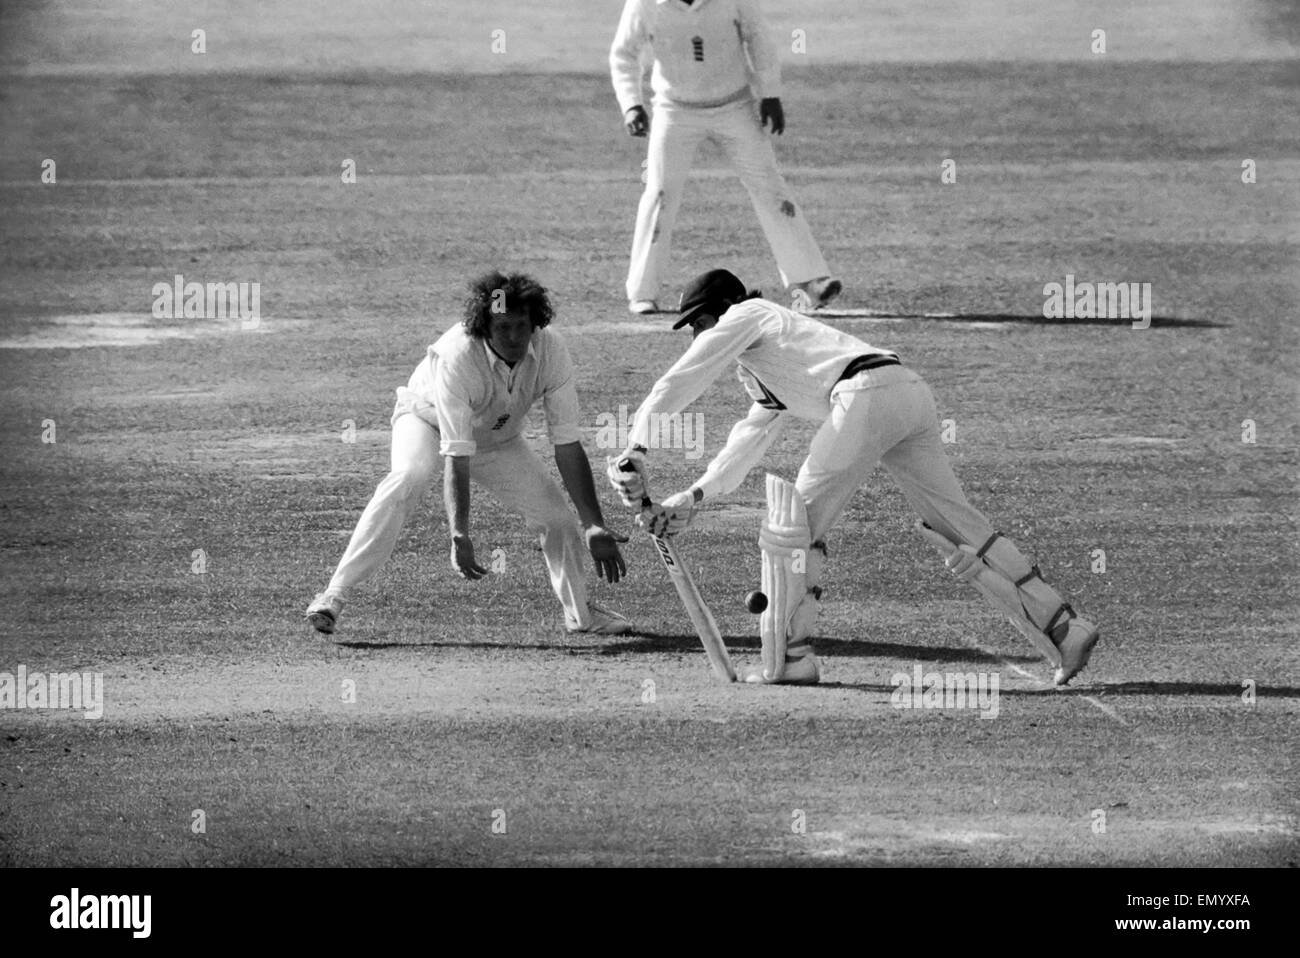 England v. Pakistan. Test match at Lords. June 1978 78-3029-003 Stock Photo